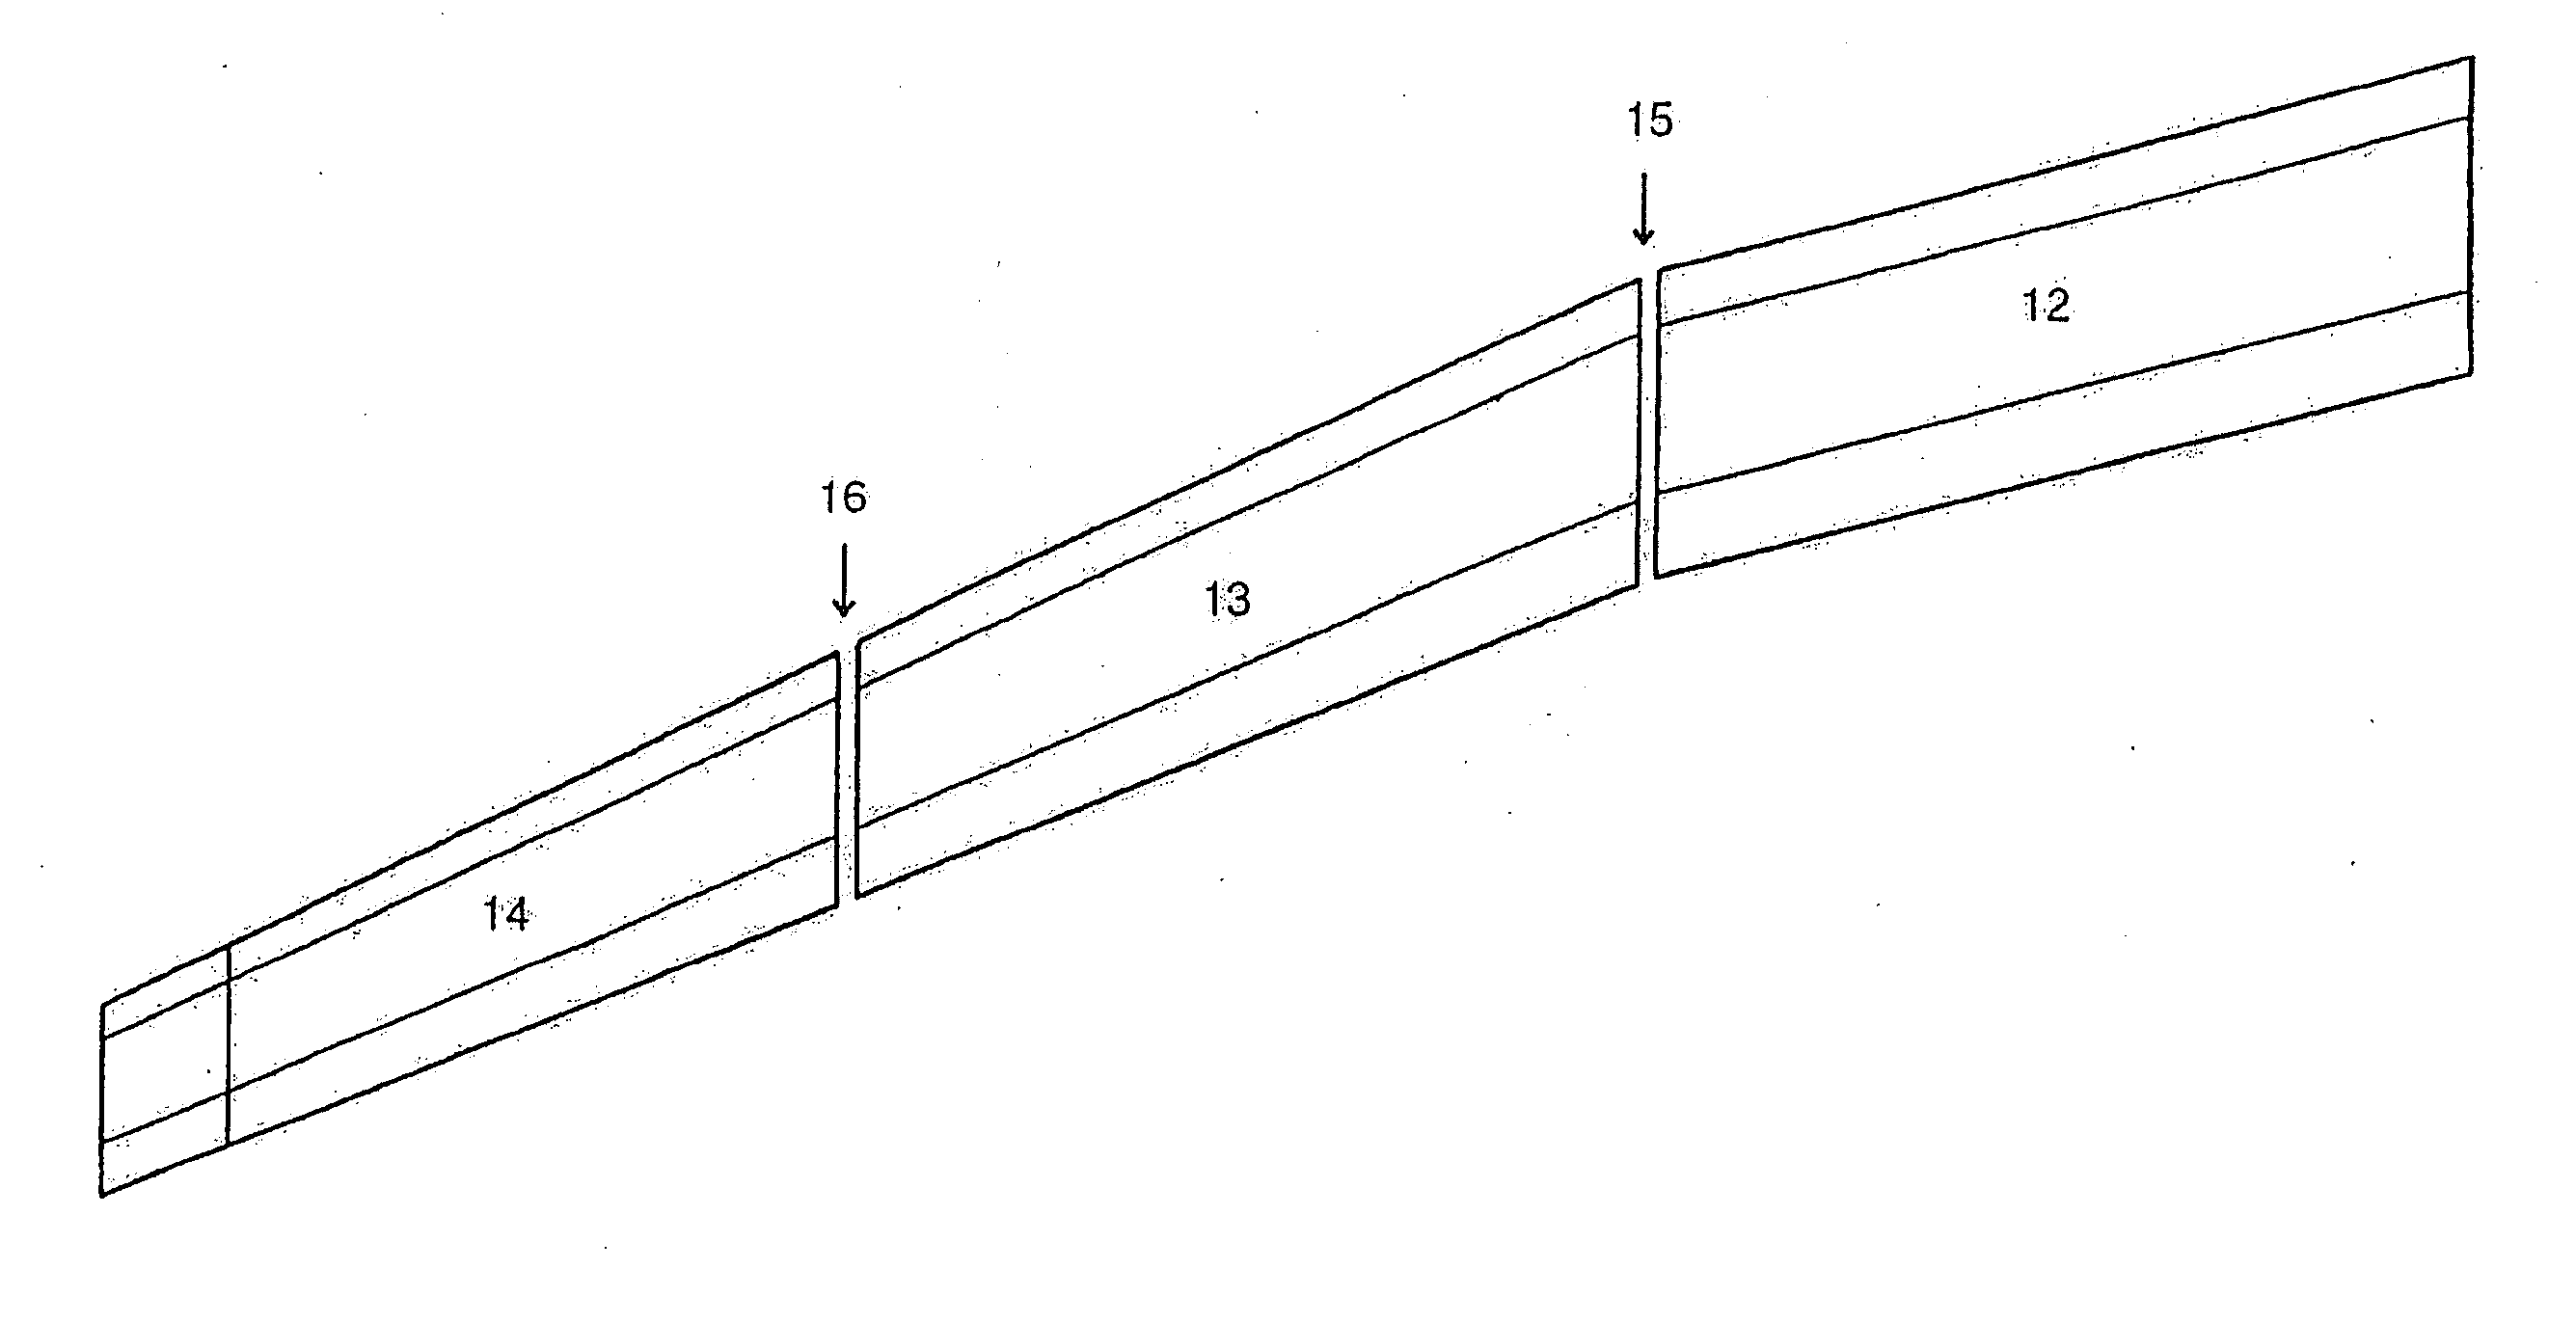 Flap interconnection system for aircraft